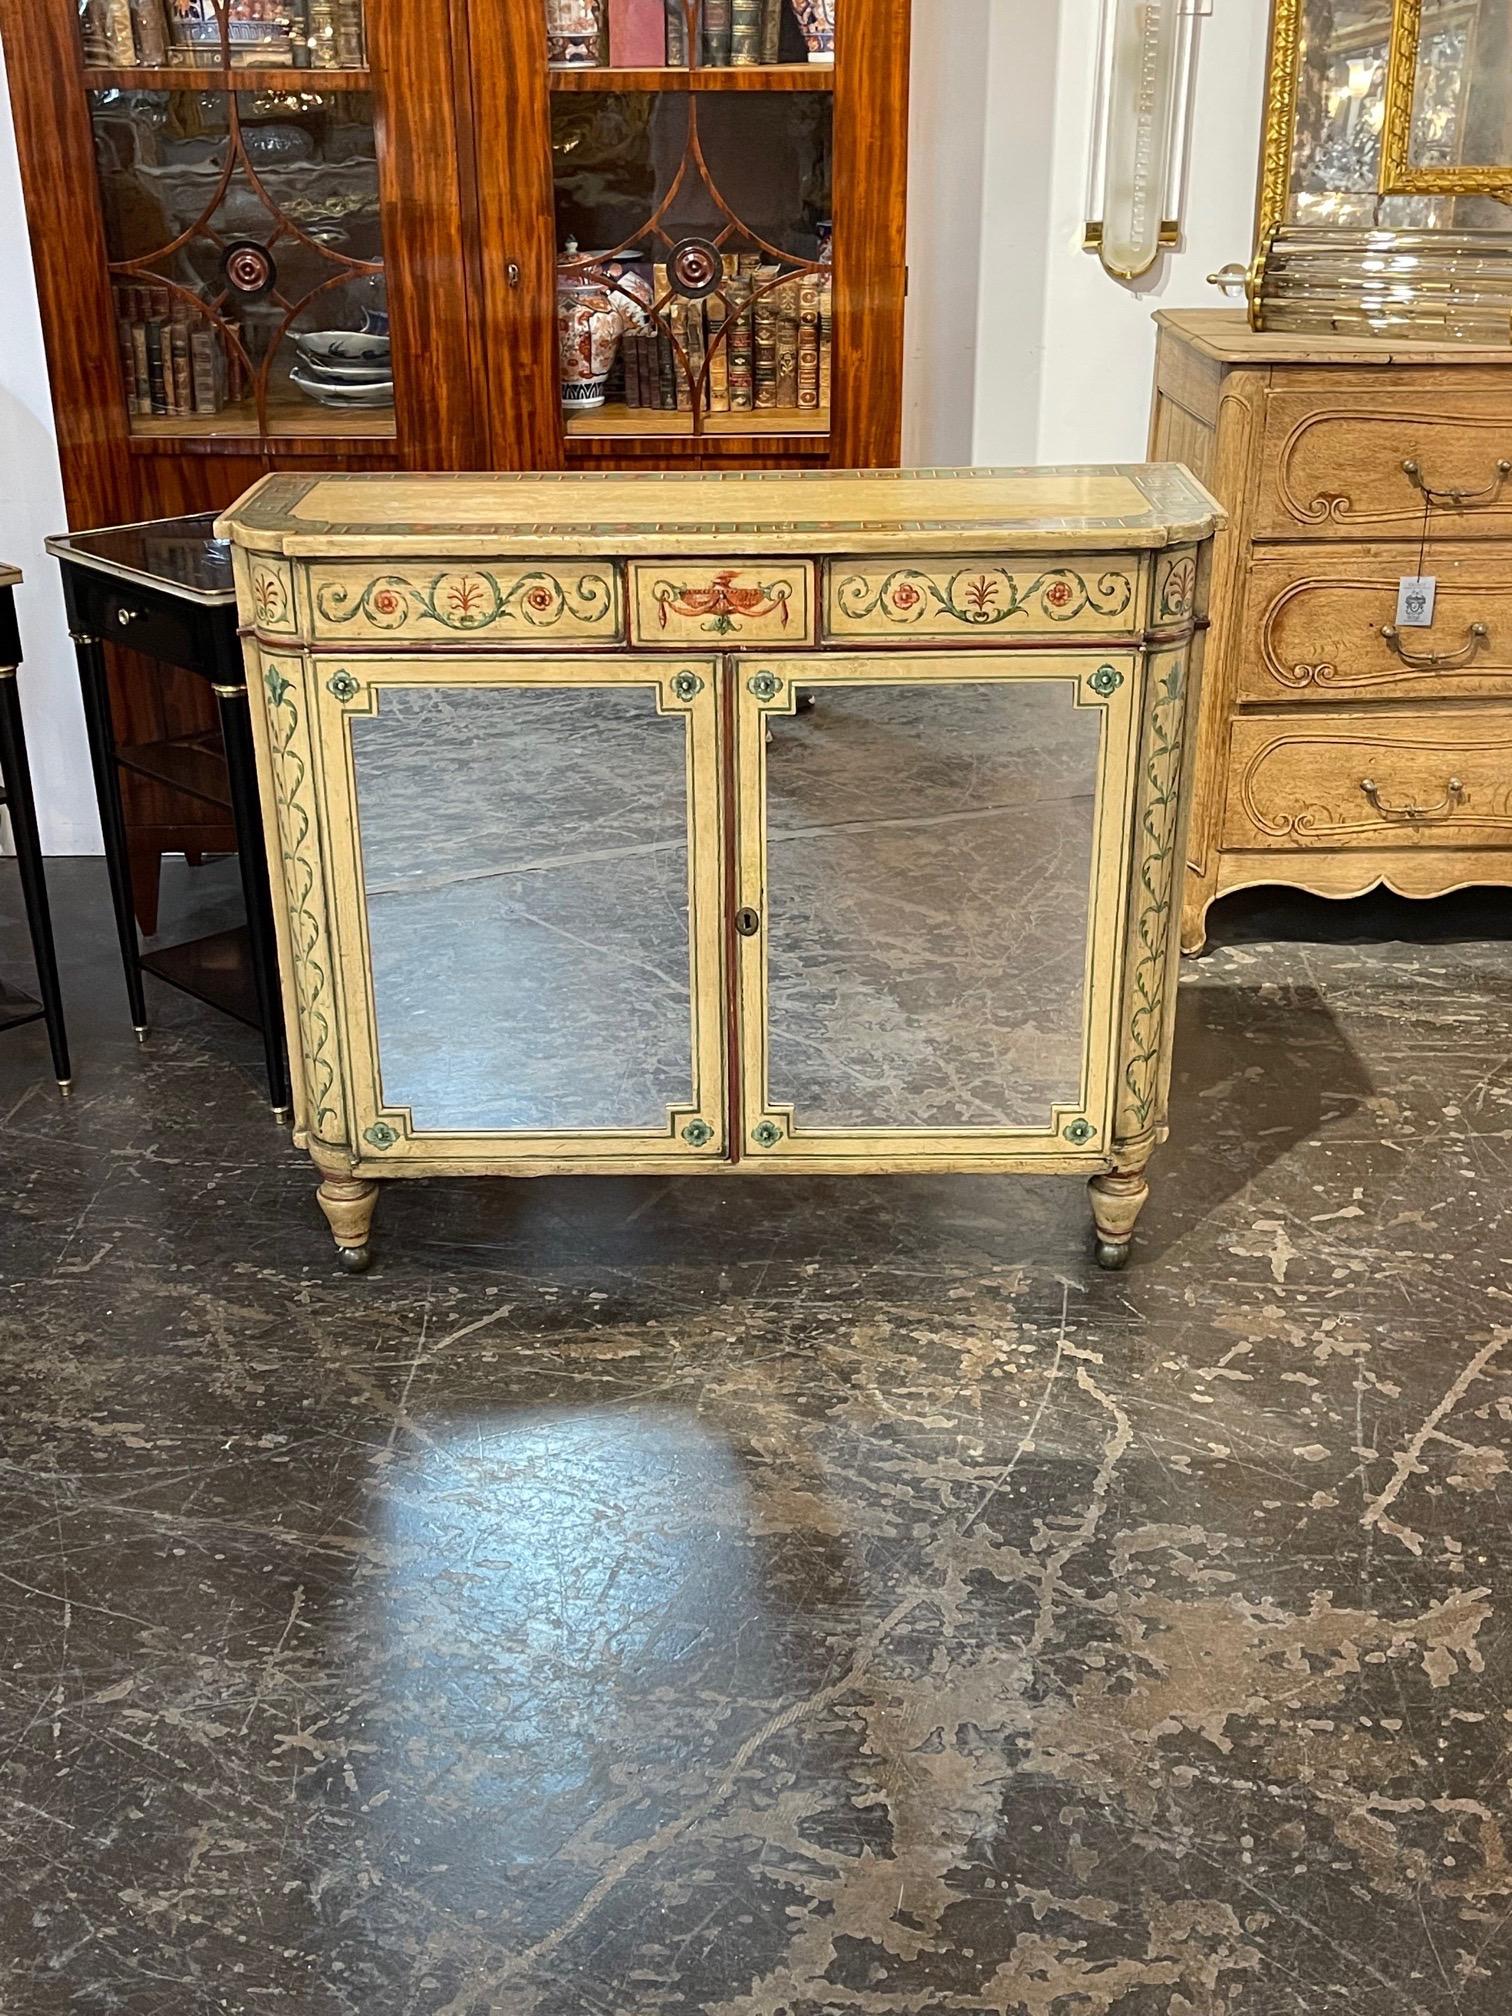 Pretty 19th century English hand painted narrow cabinet with inset mirrored doors. Nice painted designs including Greek key and floral images. A beautiful unique piece!